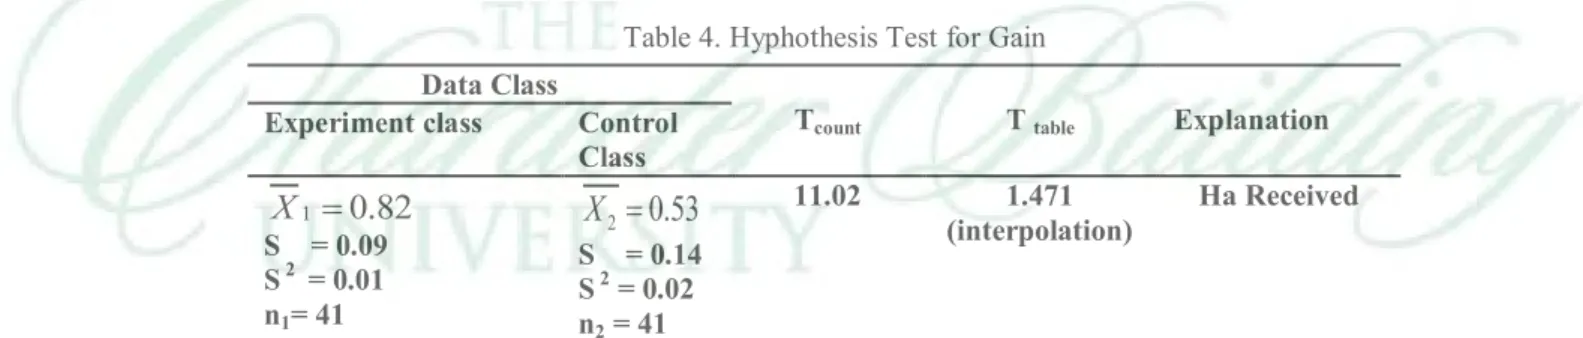 Table 4. Hyphothesis Test for Gain 